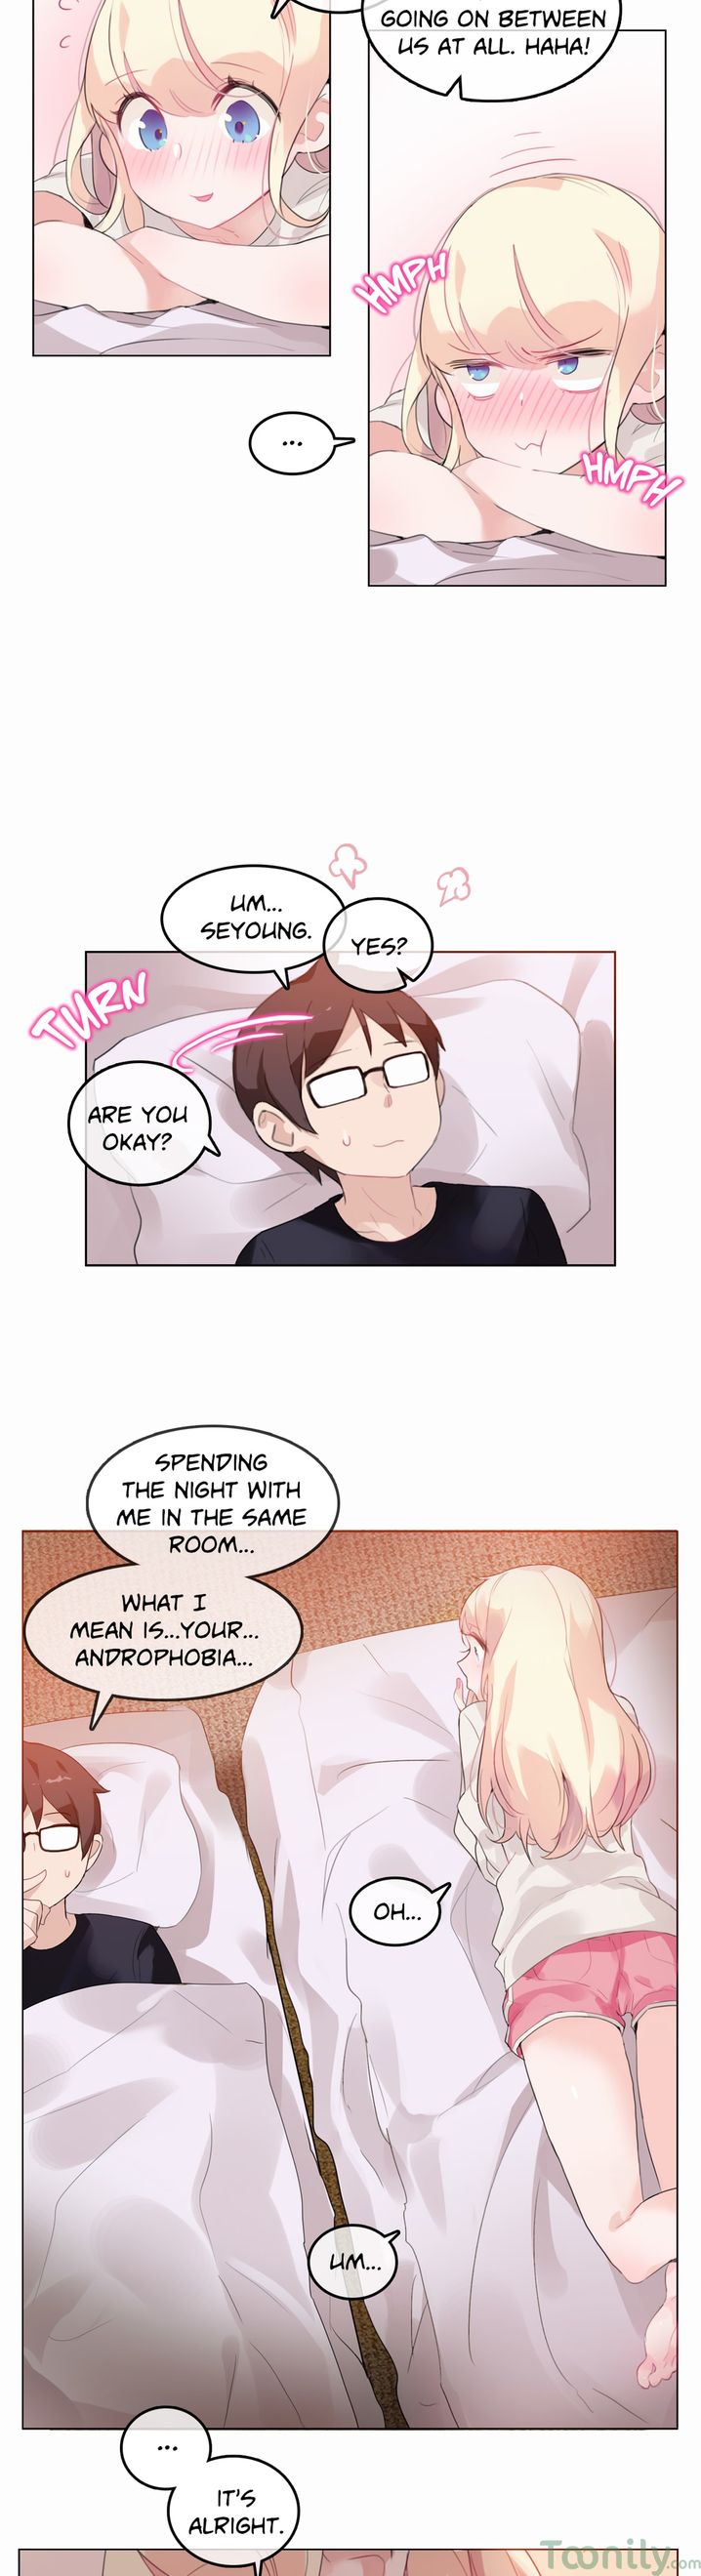 A Pervert’s Daily Life - Chapter 21 Page 2